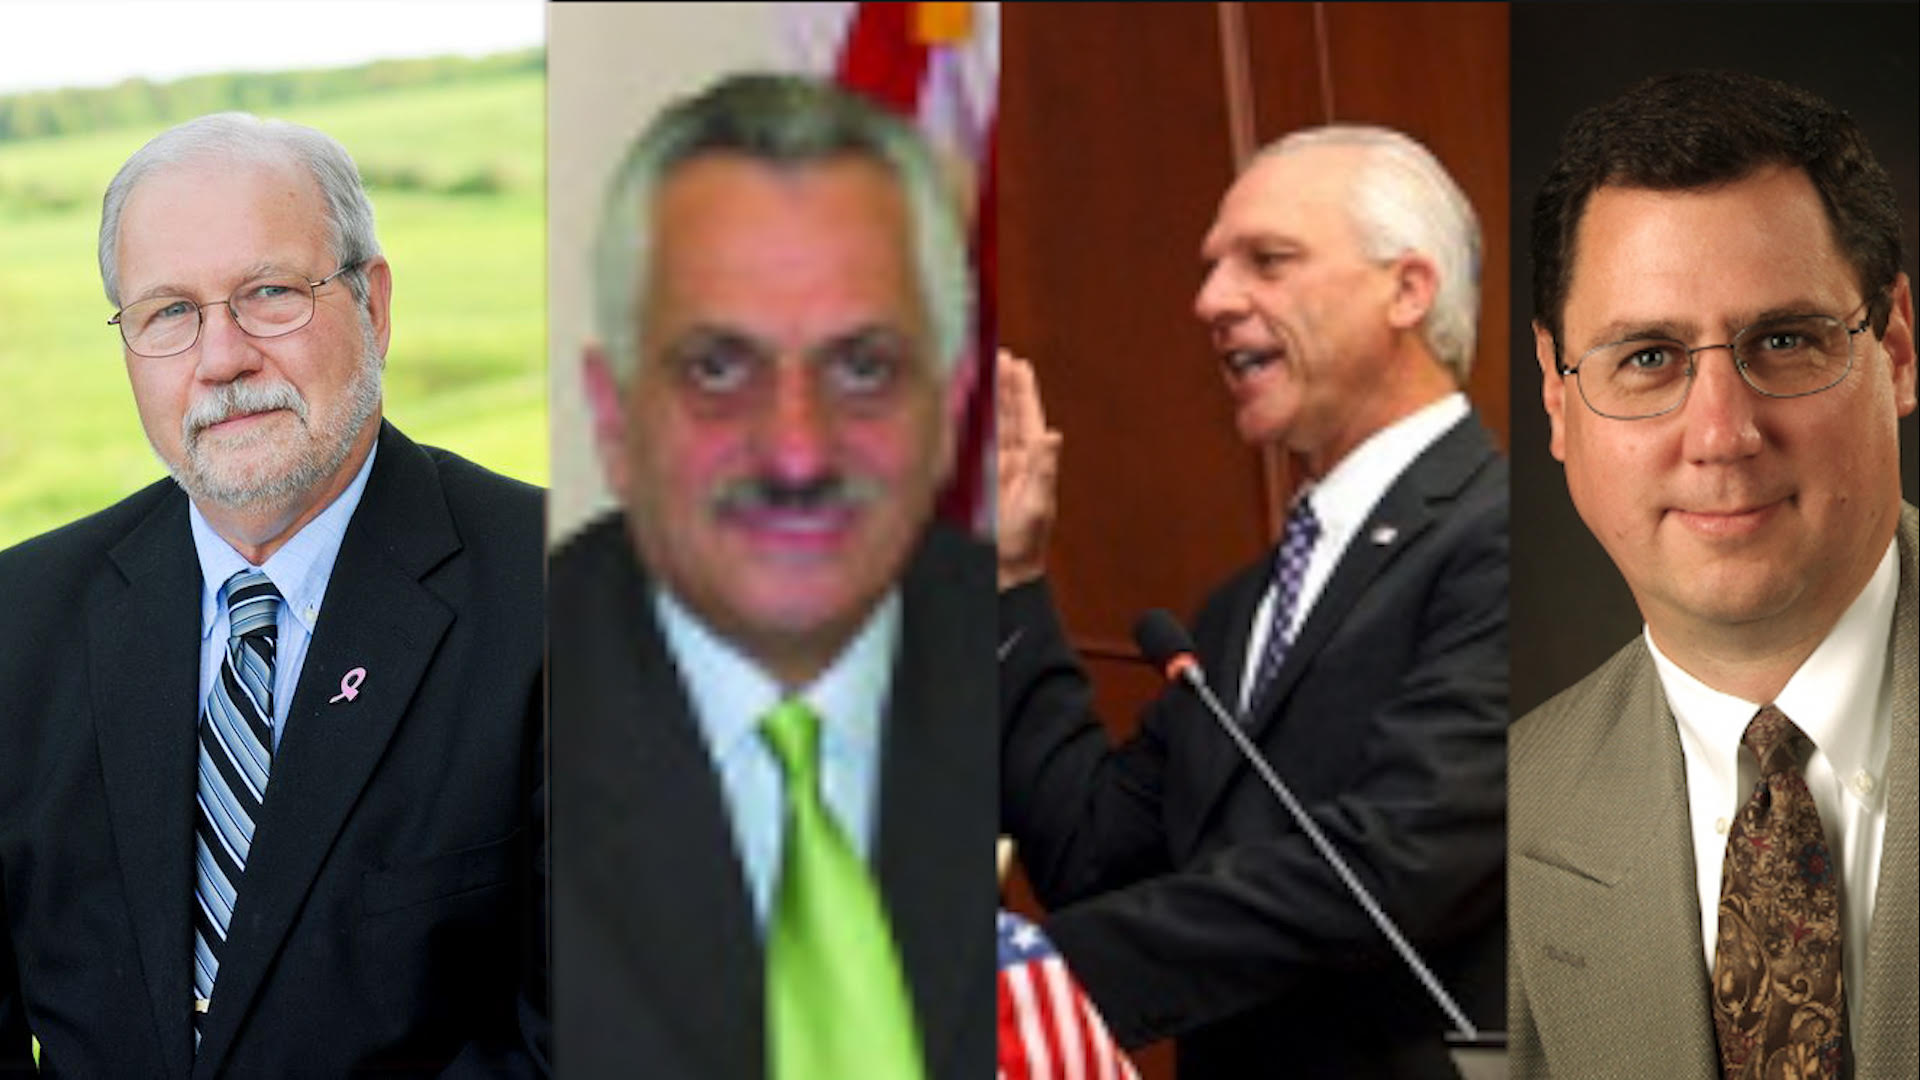 Four more NY clerks in addition to Kearns who opposed issuing licenses to illegal immigrants. 